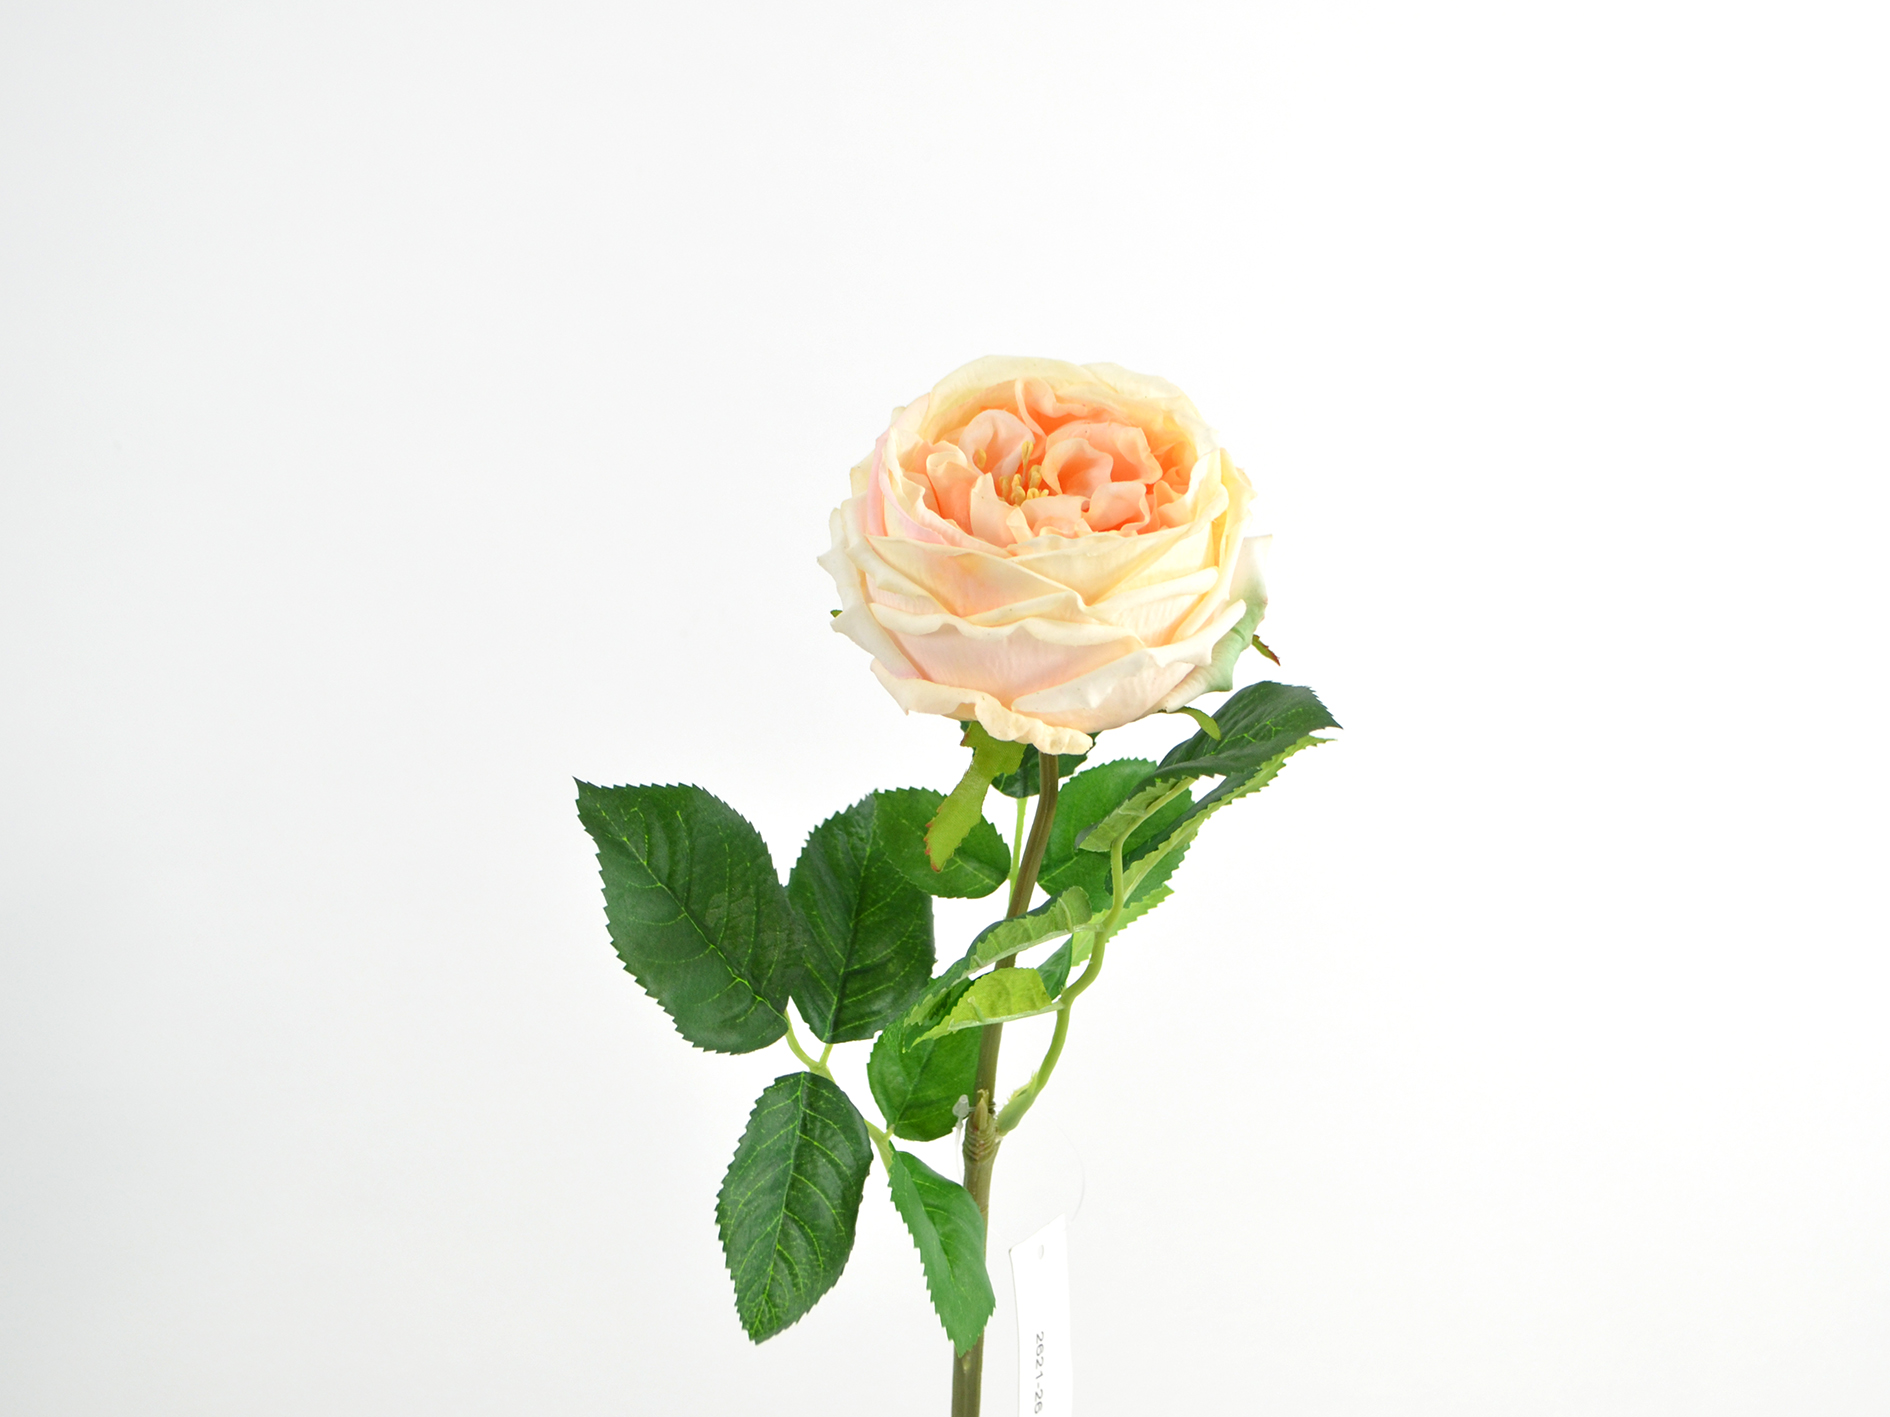 Cabagerose natural touch, 59cm, gelb